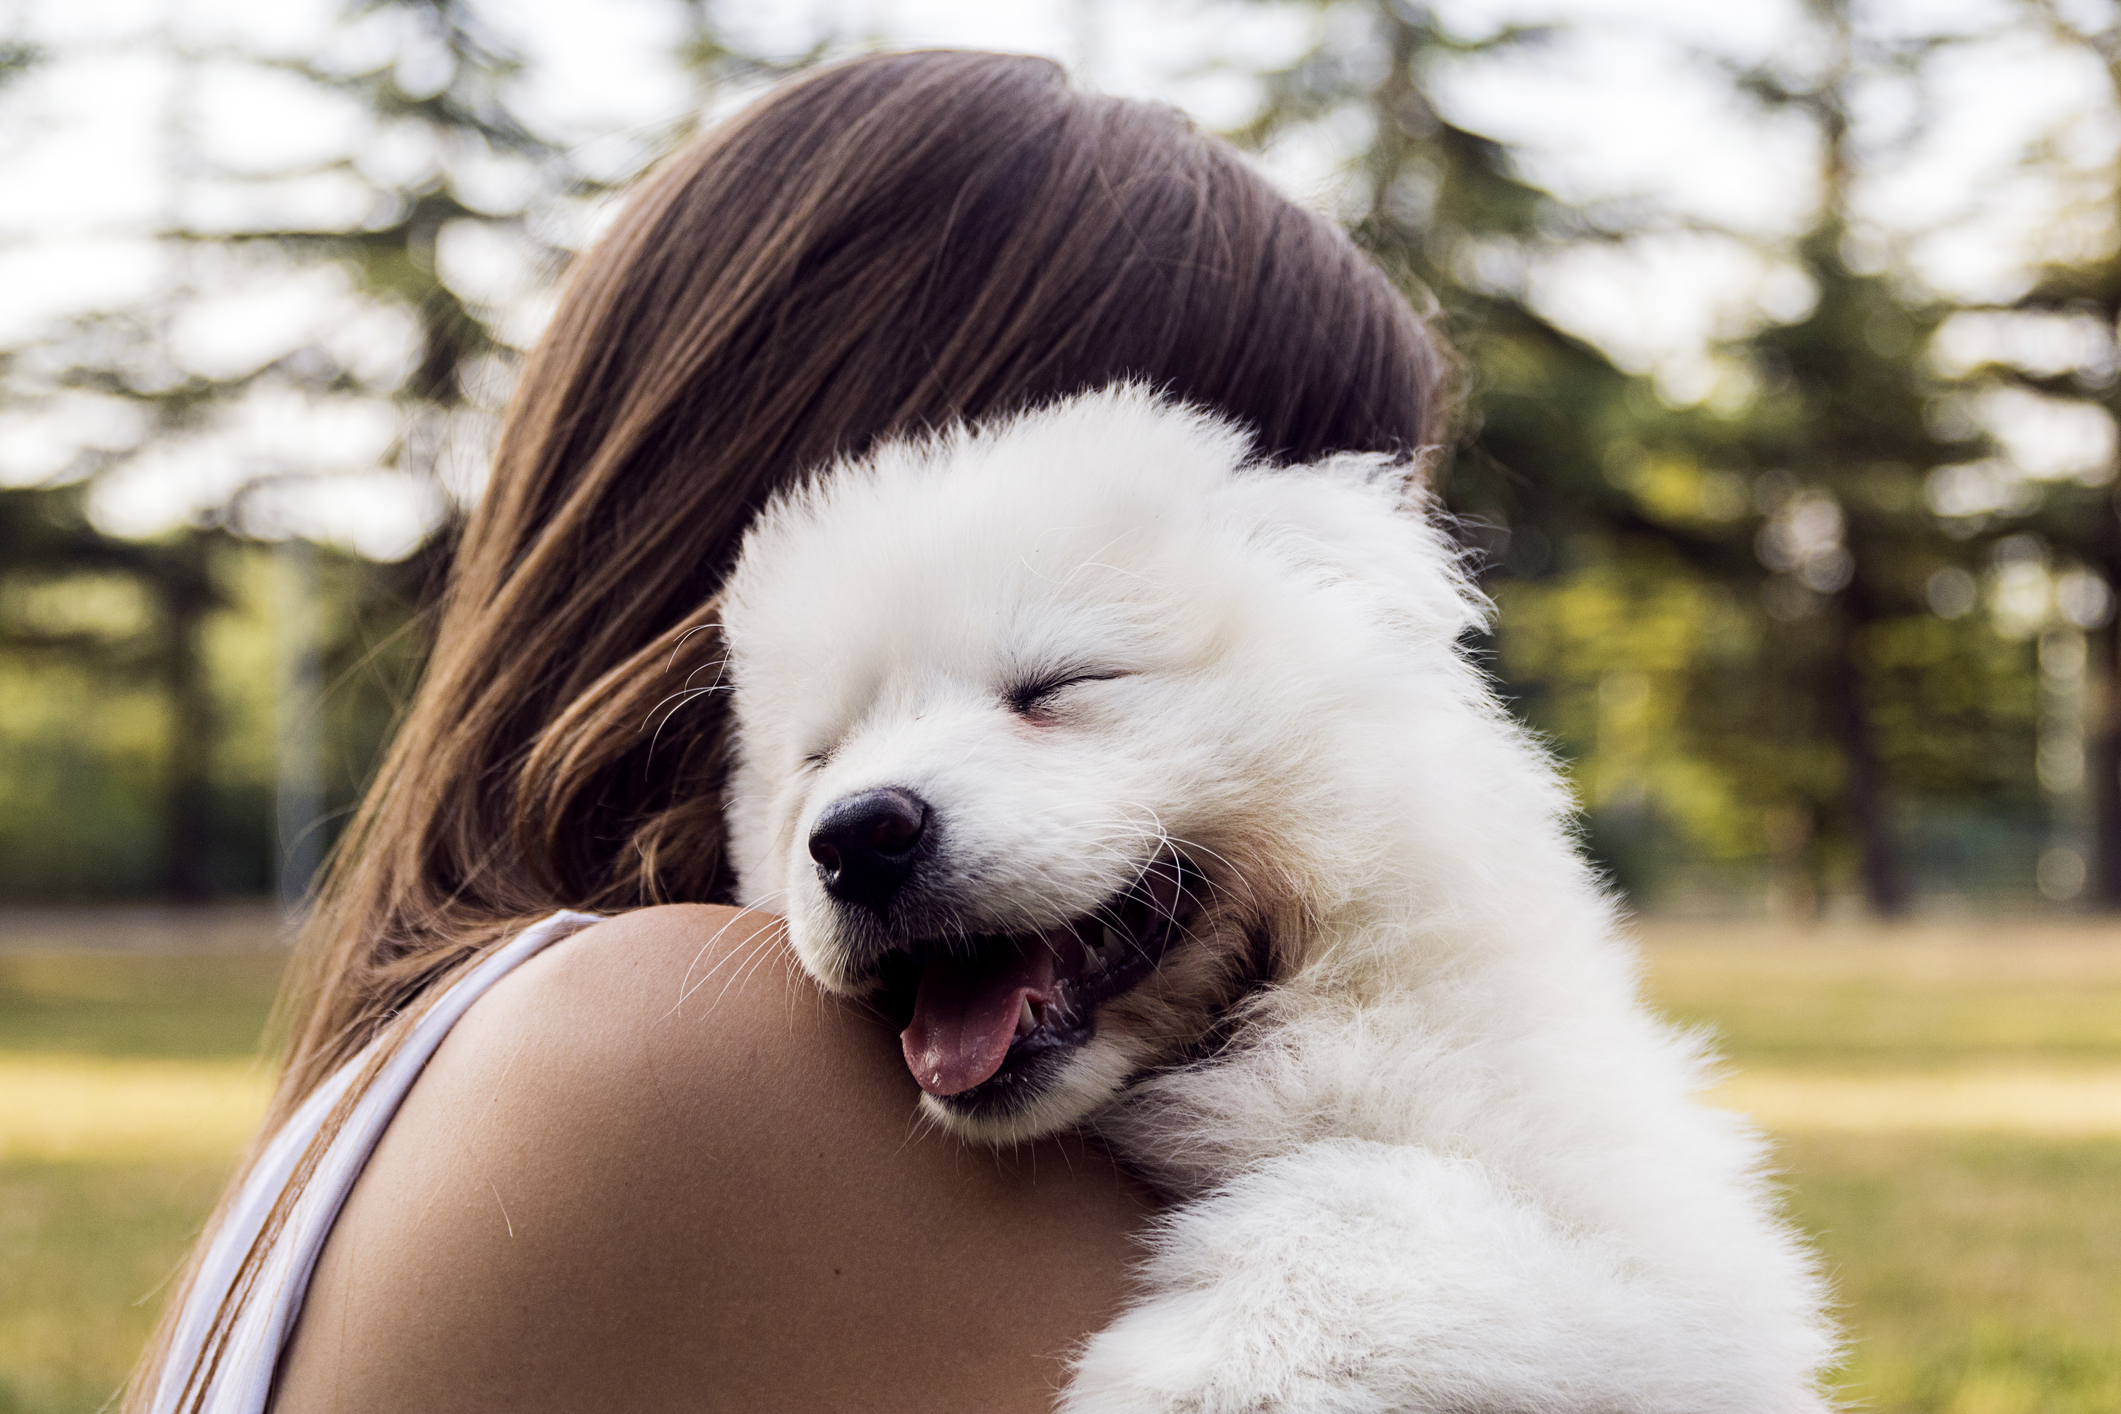 An owner hugging a fluffy white dog in a woodland surrounding